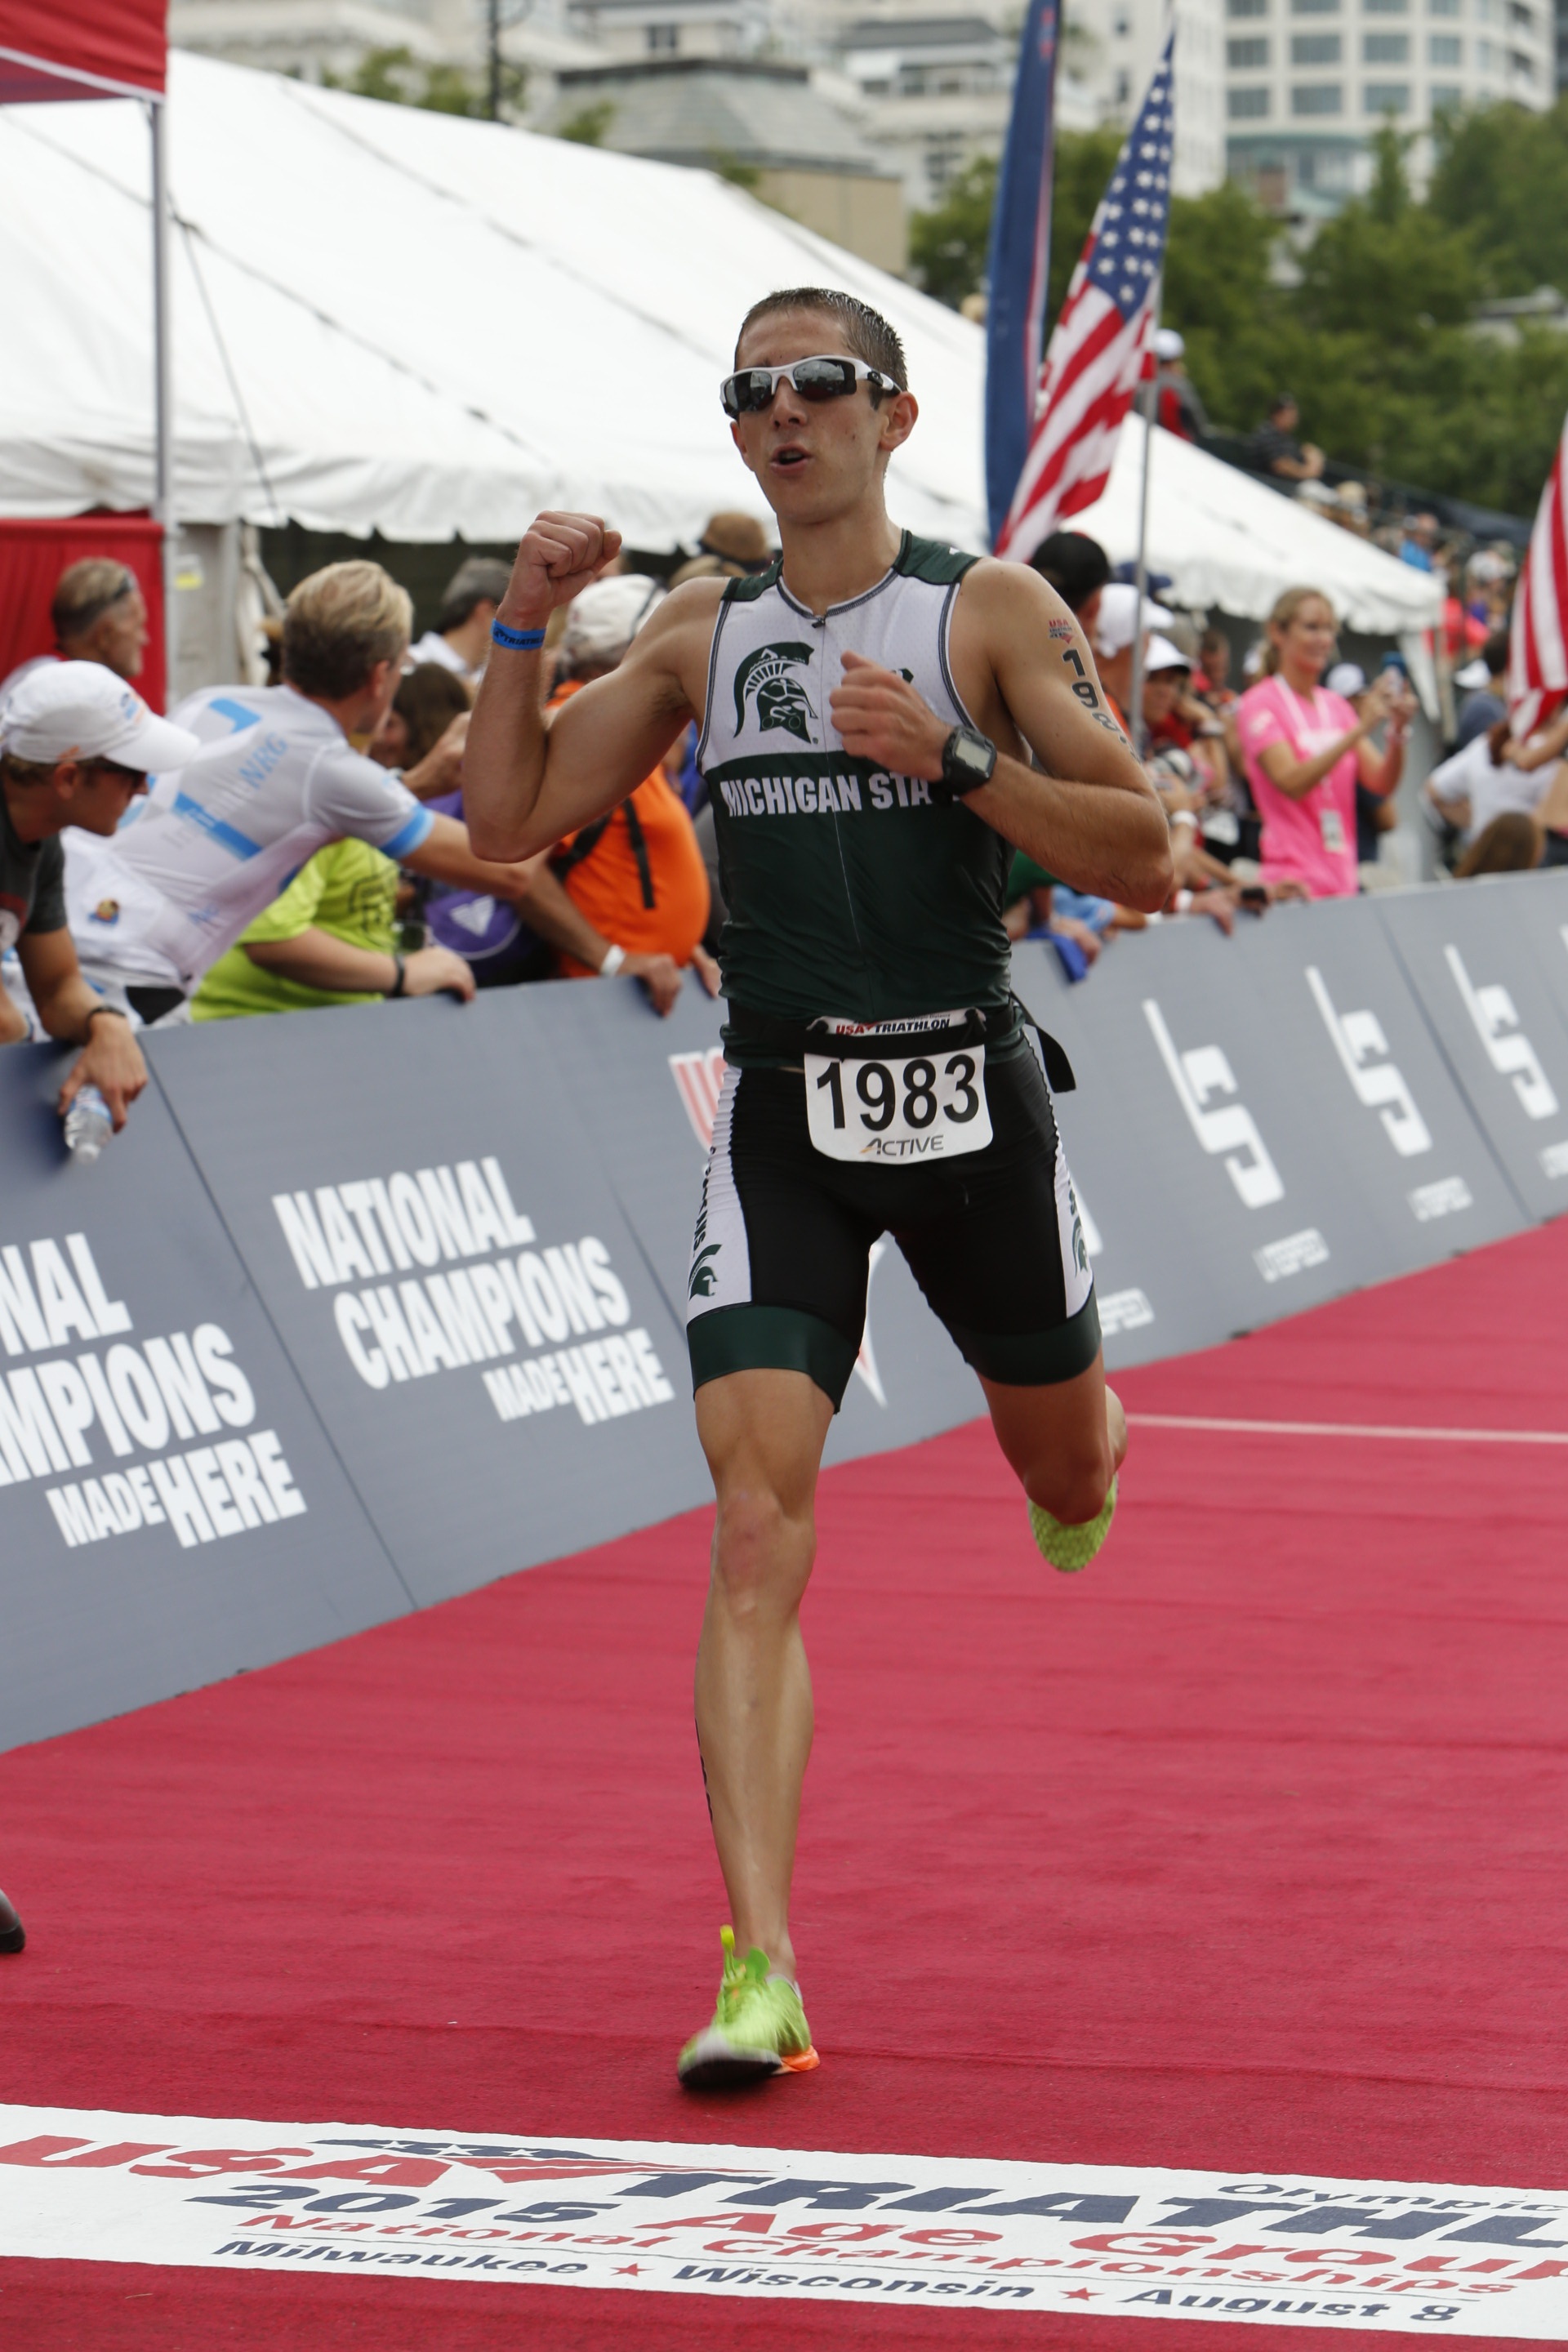 2015 USAT Olympic Distance Age Group National Championship — Todd Buckingham picture